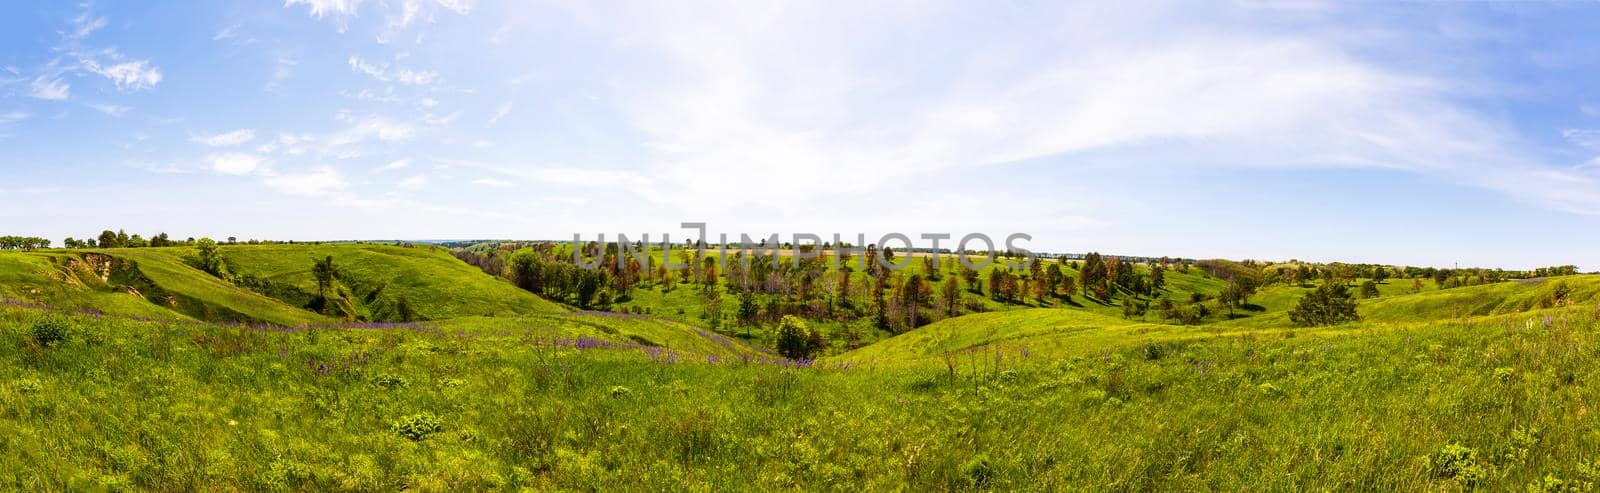 Green fresh grass on blue sky panorama. Ready to use! by Andelov13